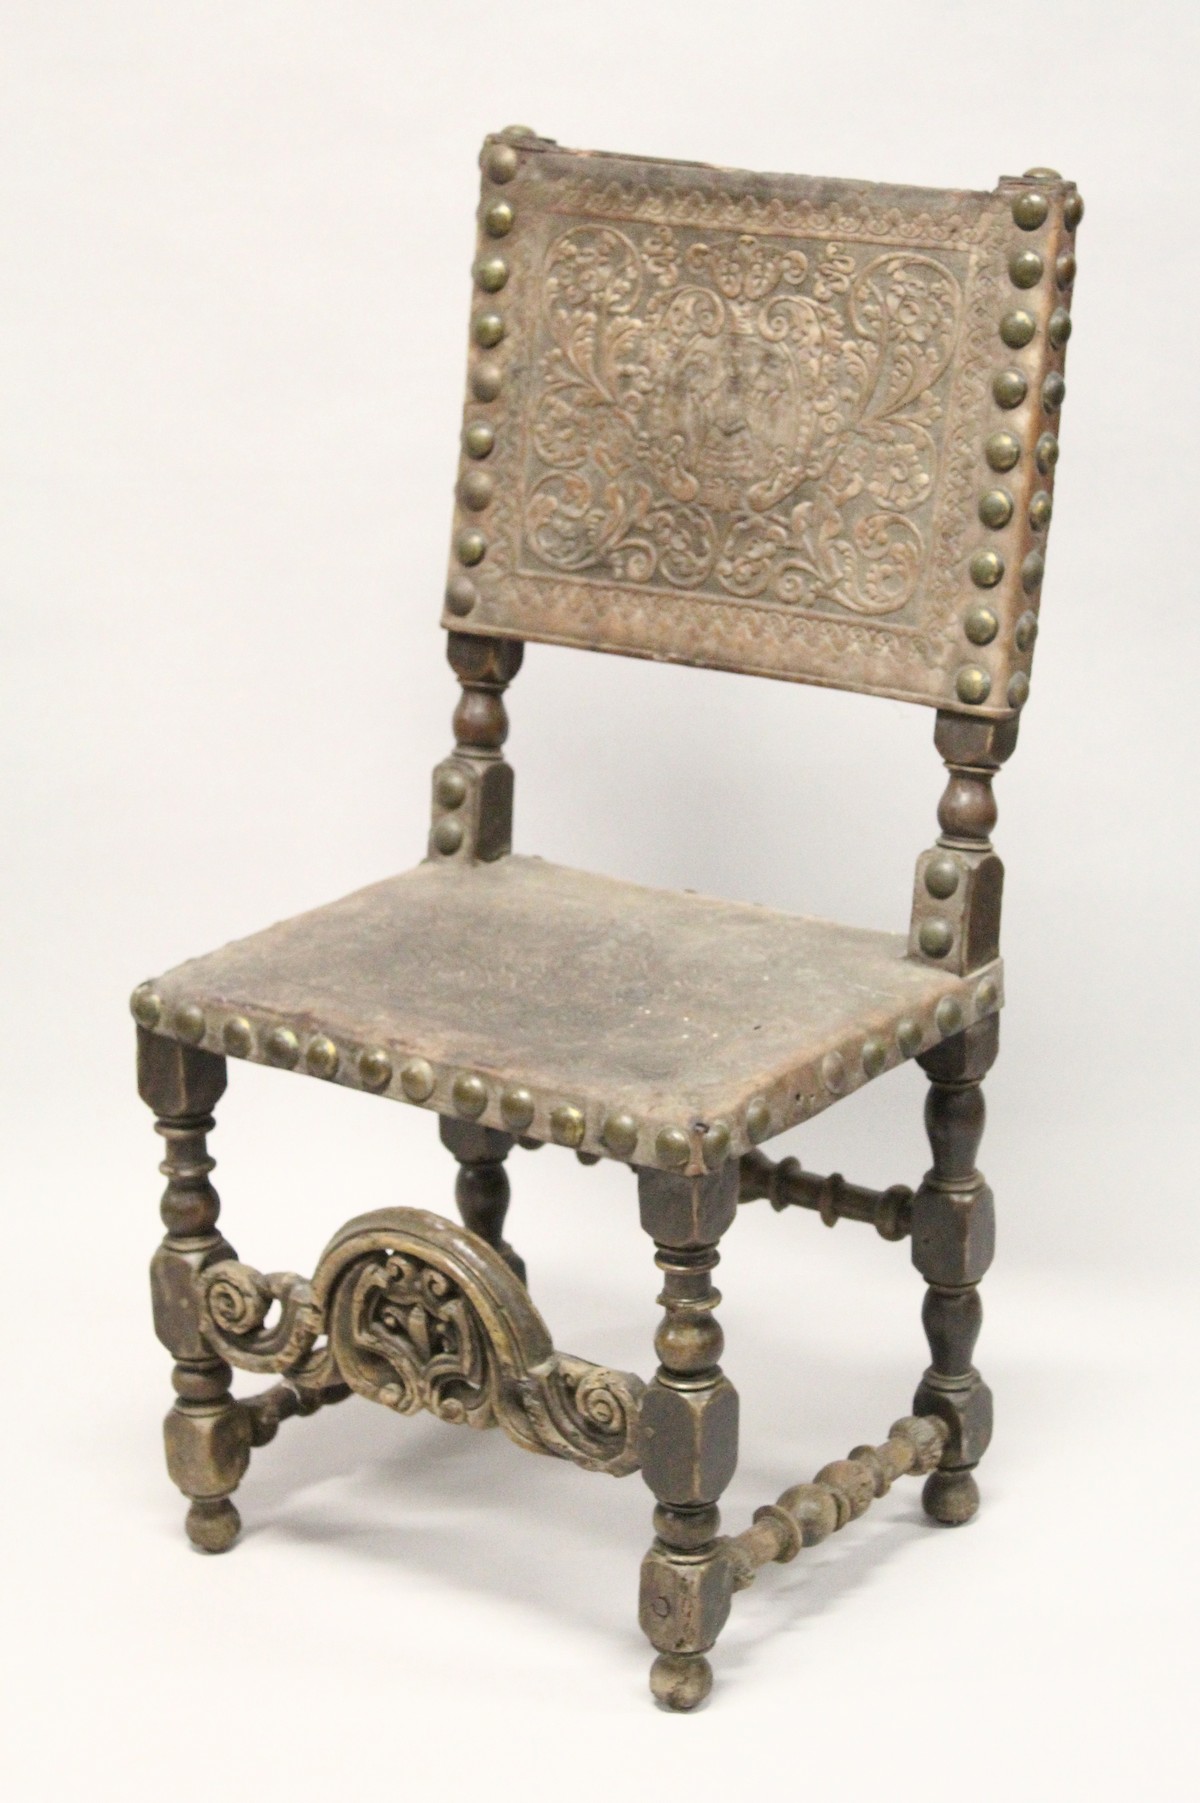 A 17TH CENTURY OAK SIDE CHAIR, with heavy brass studded embossed leather back and seat, turned